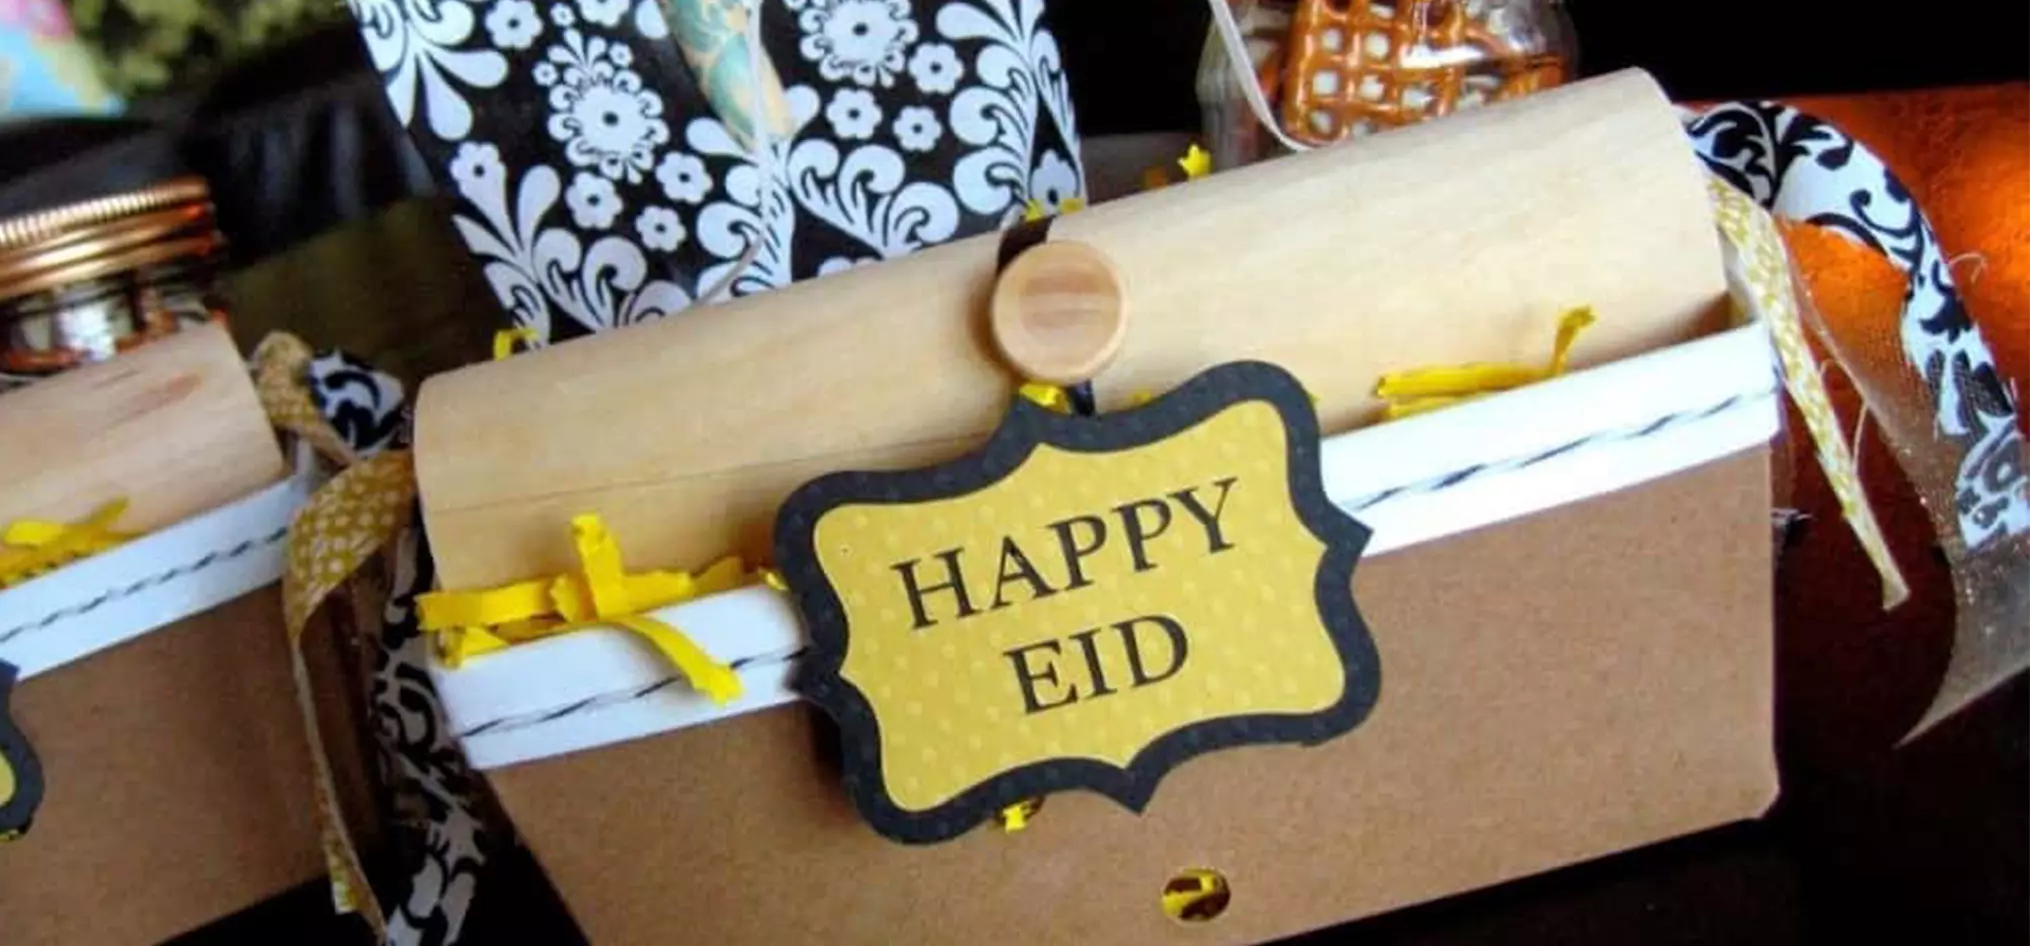 Gifts to Send on this Eid-Ul-Adha 2022